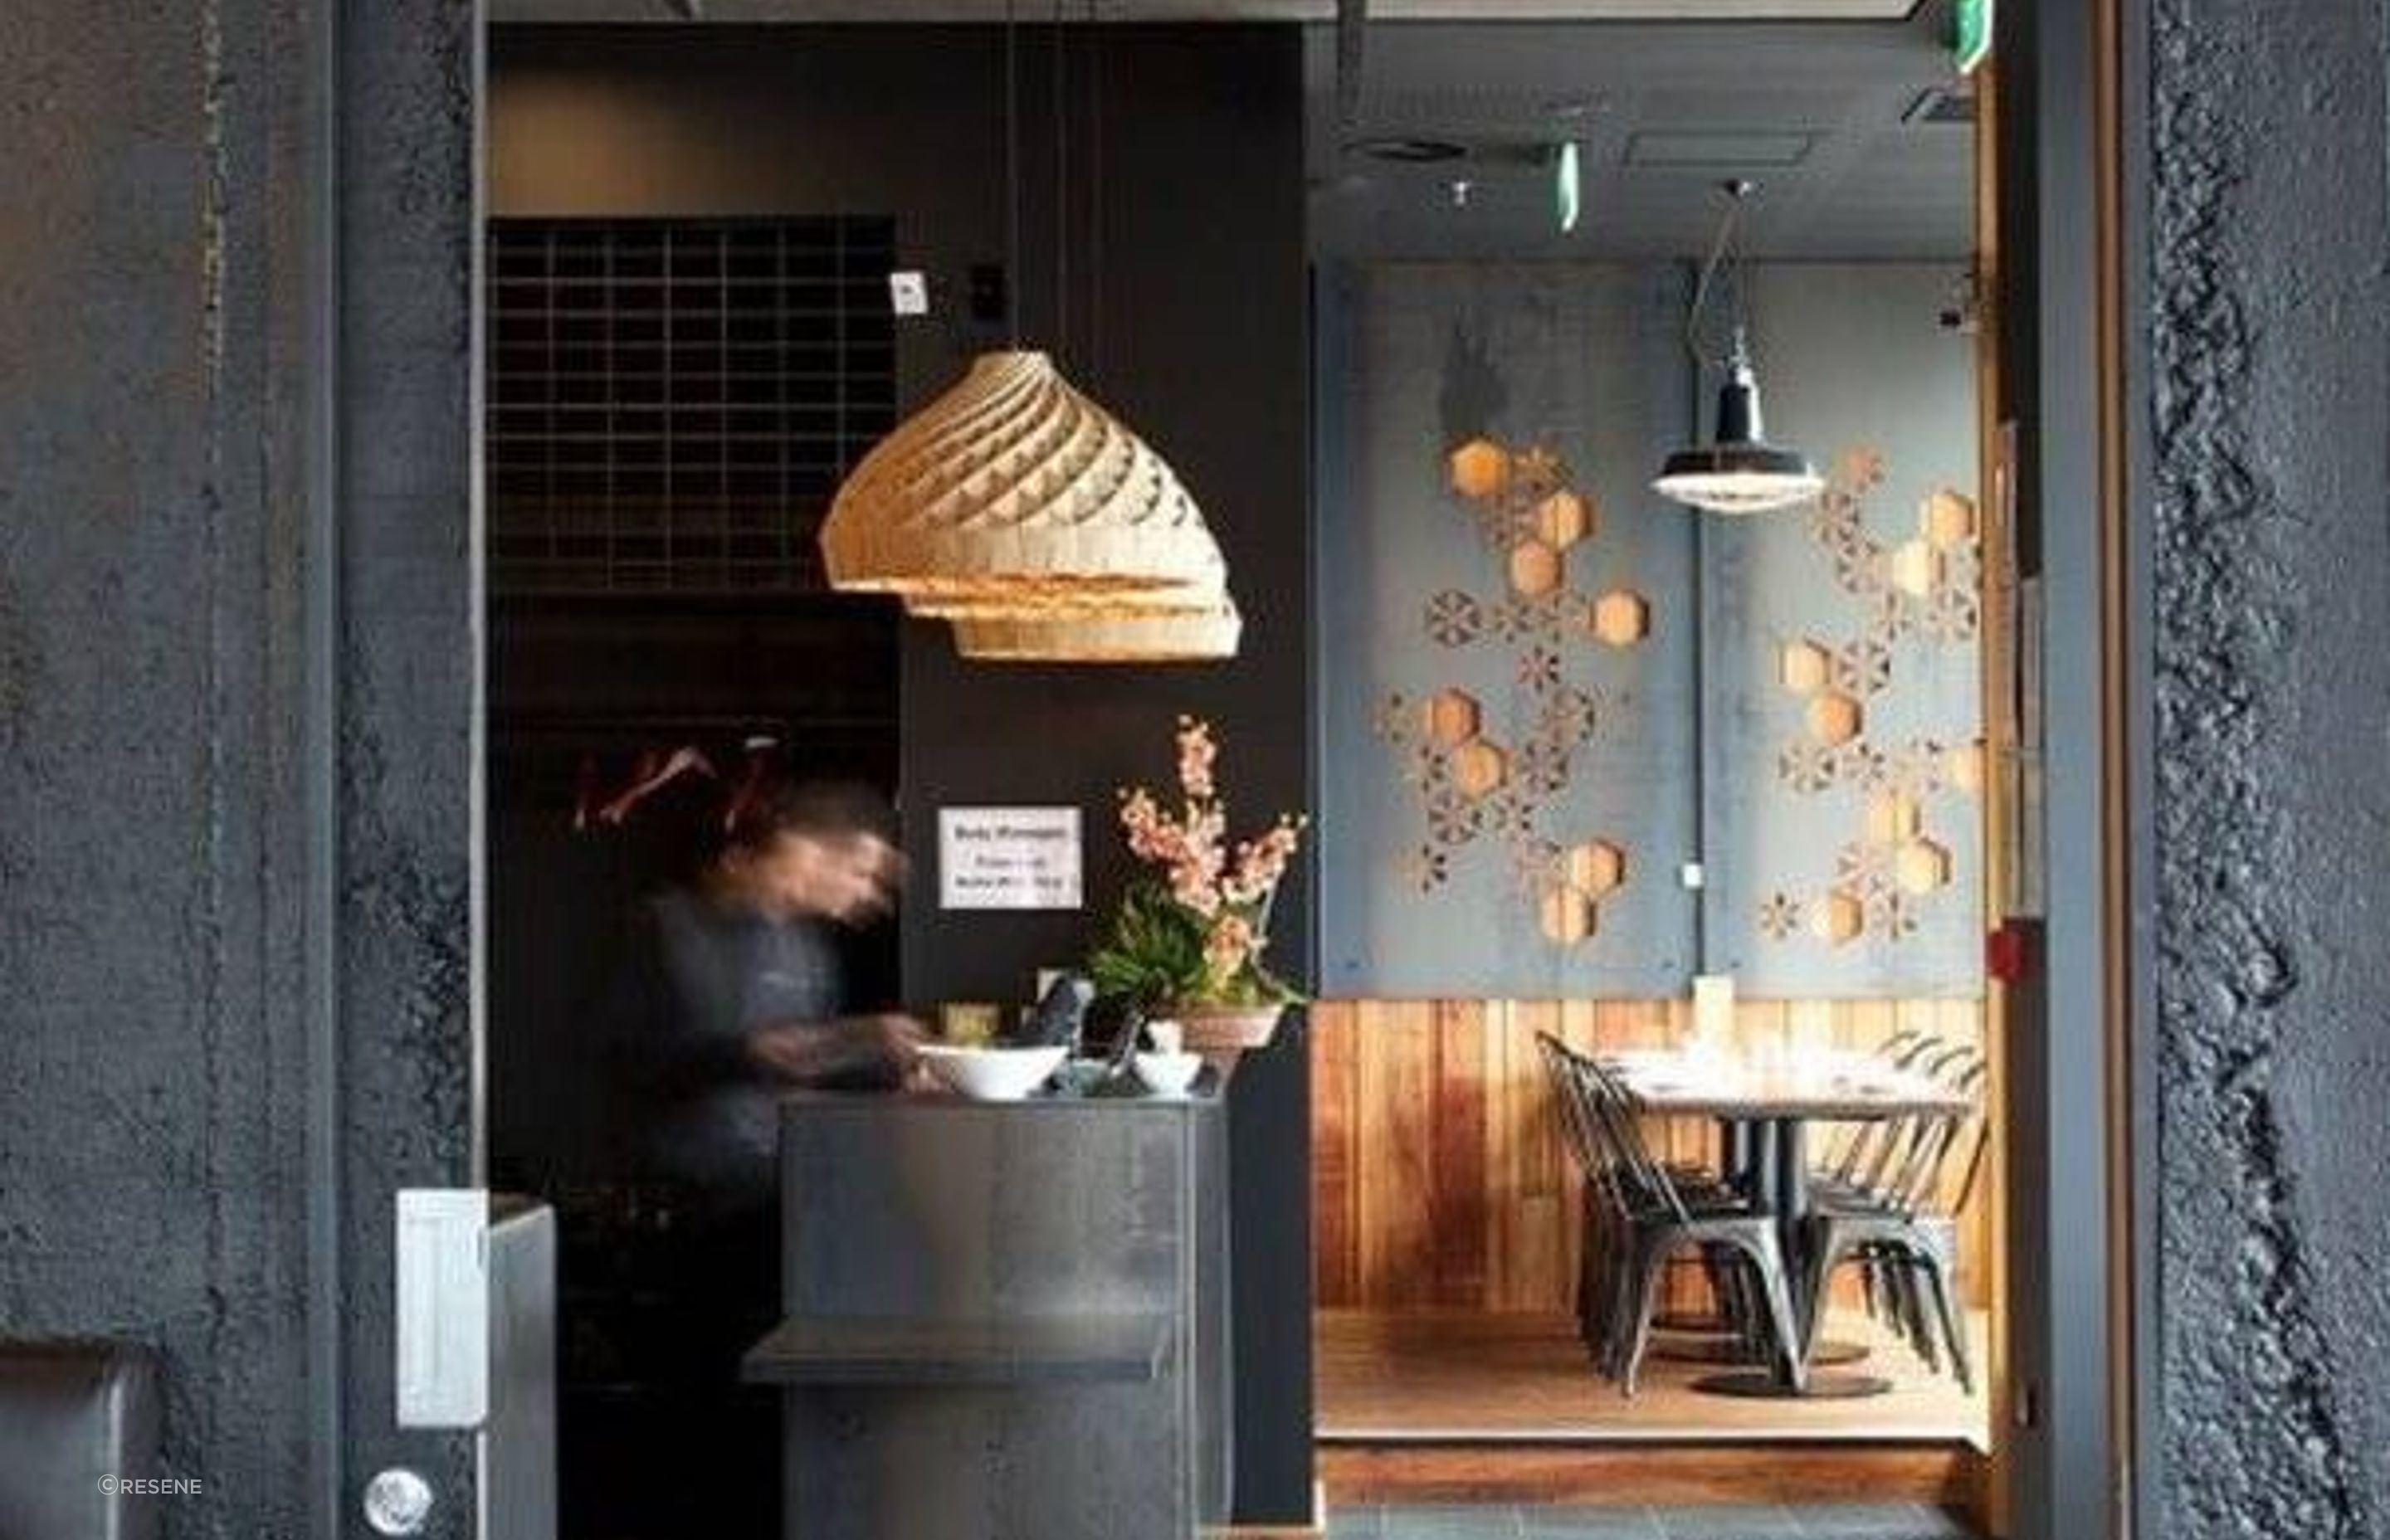 Spice Paragon Restaurant in Christchurch features Muros Grey Roughcast Concrete wall panels installed vertically and painted in Resene All Black. Design by Crafted.